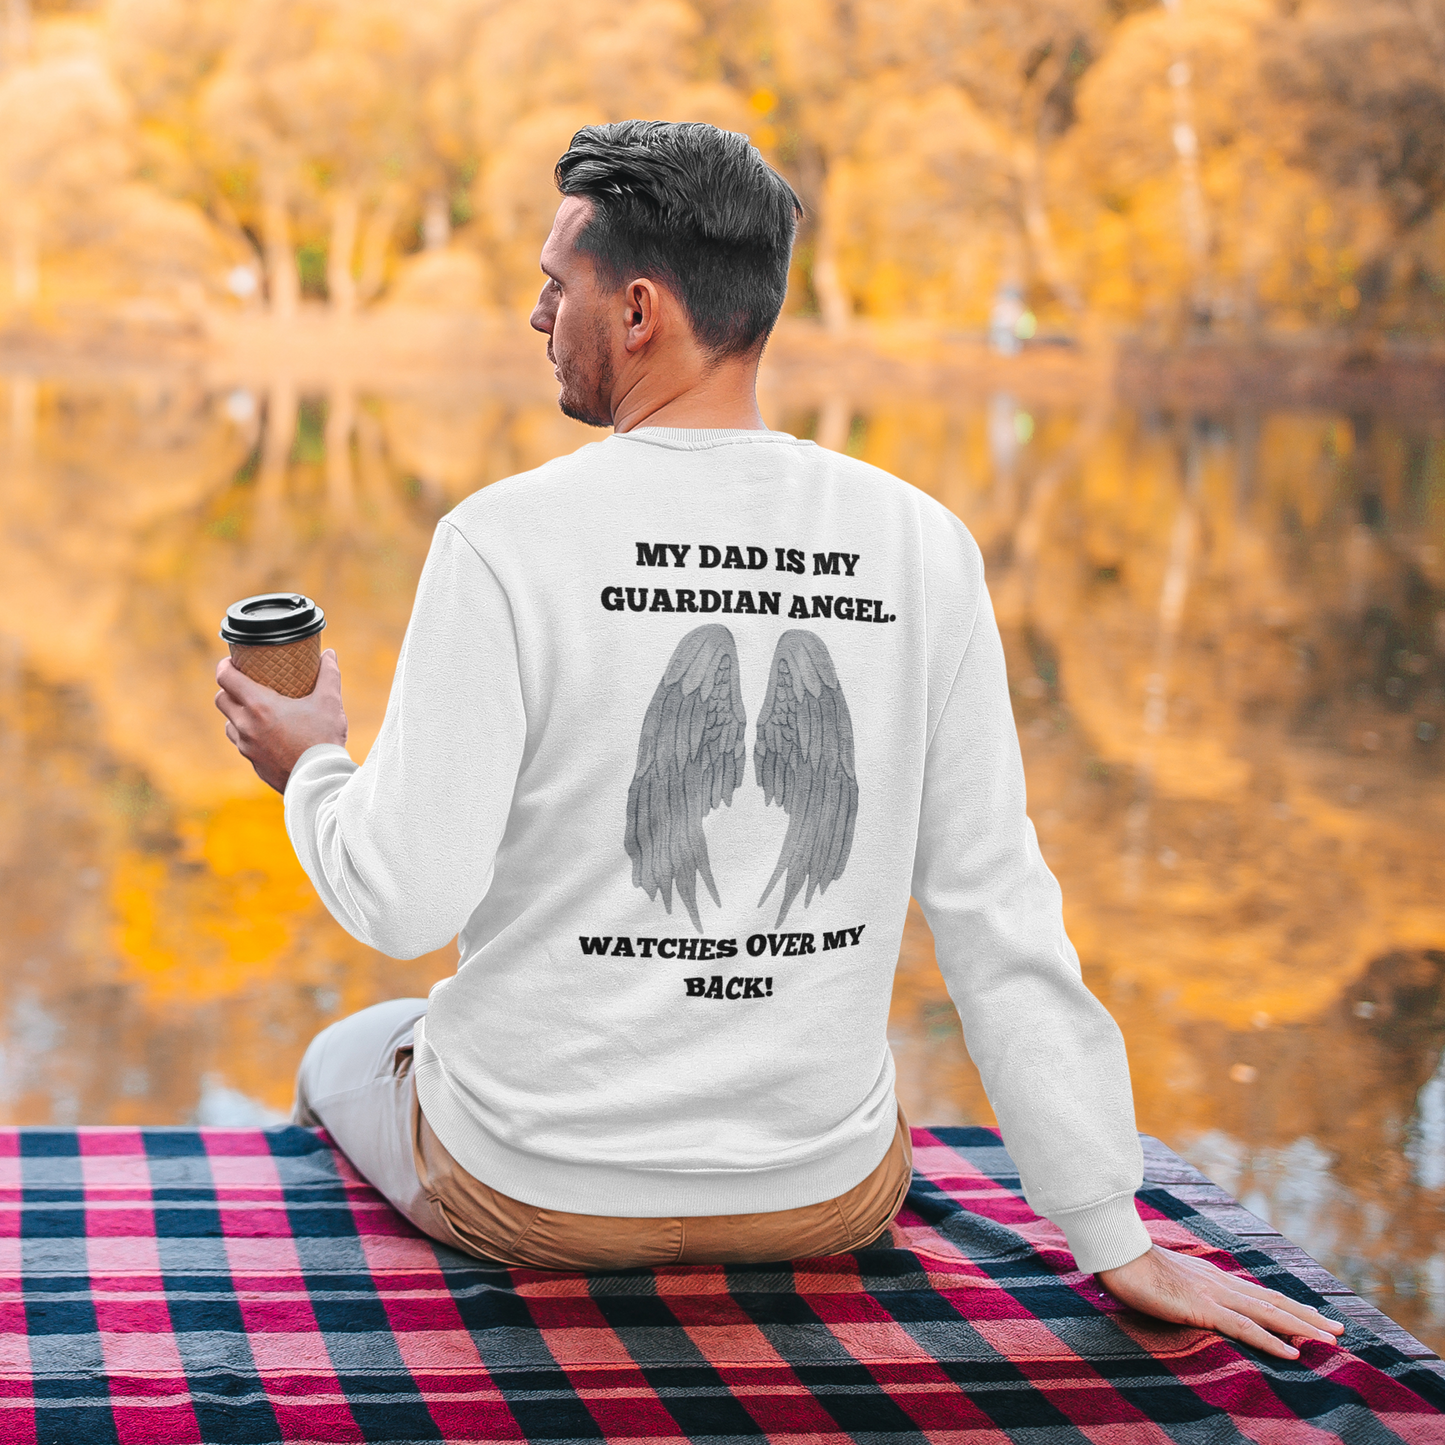 Get trendy with My Dad is my guardian Angel Black text Crewneck Pullover Sweatshirt - Sweatshirts available at Good Gift Company. Grab yours for $29.88 today!